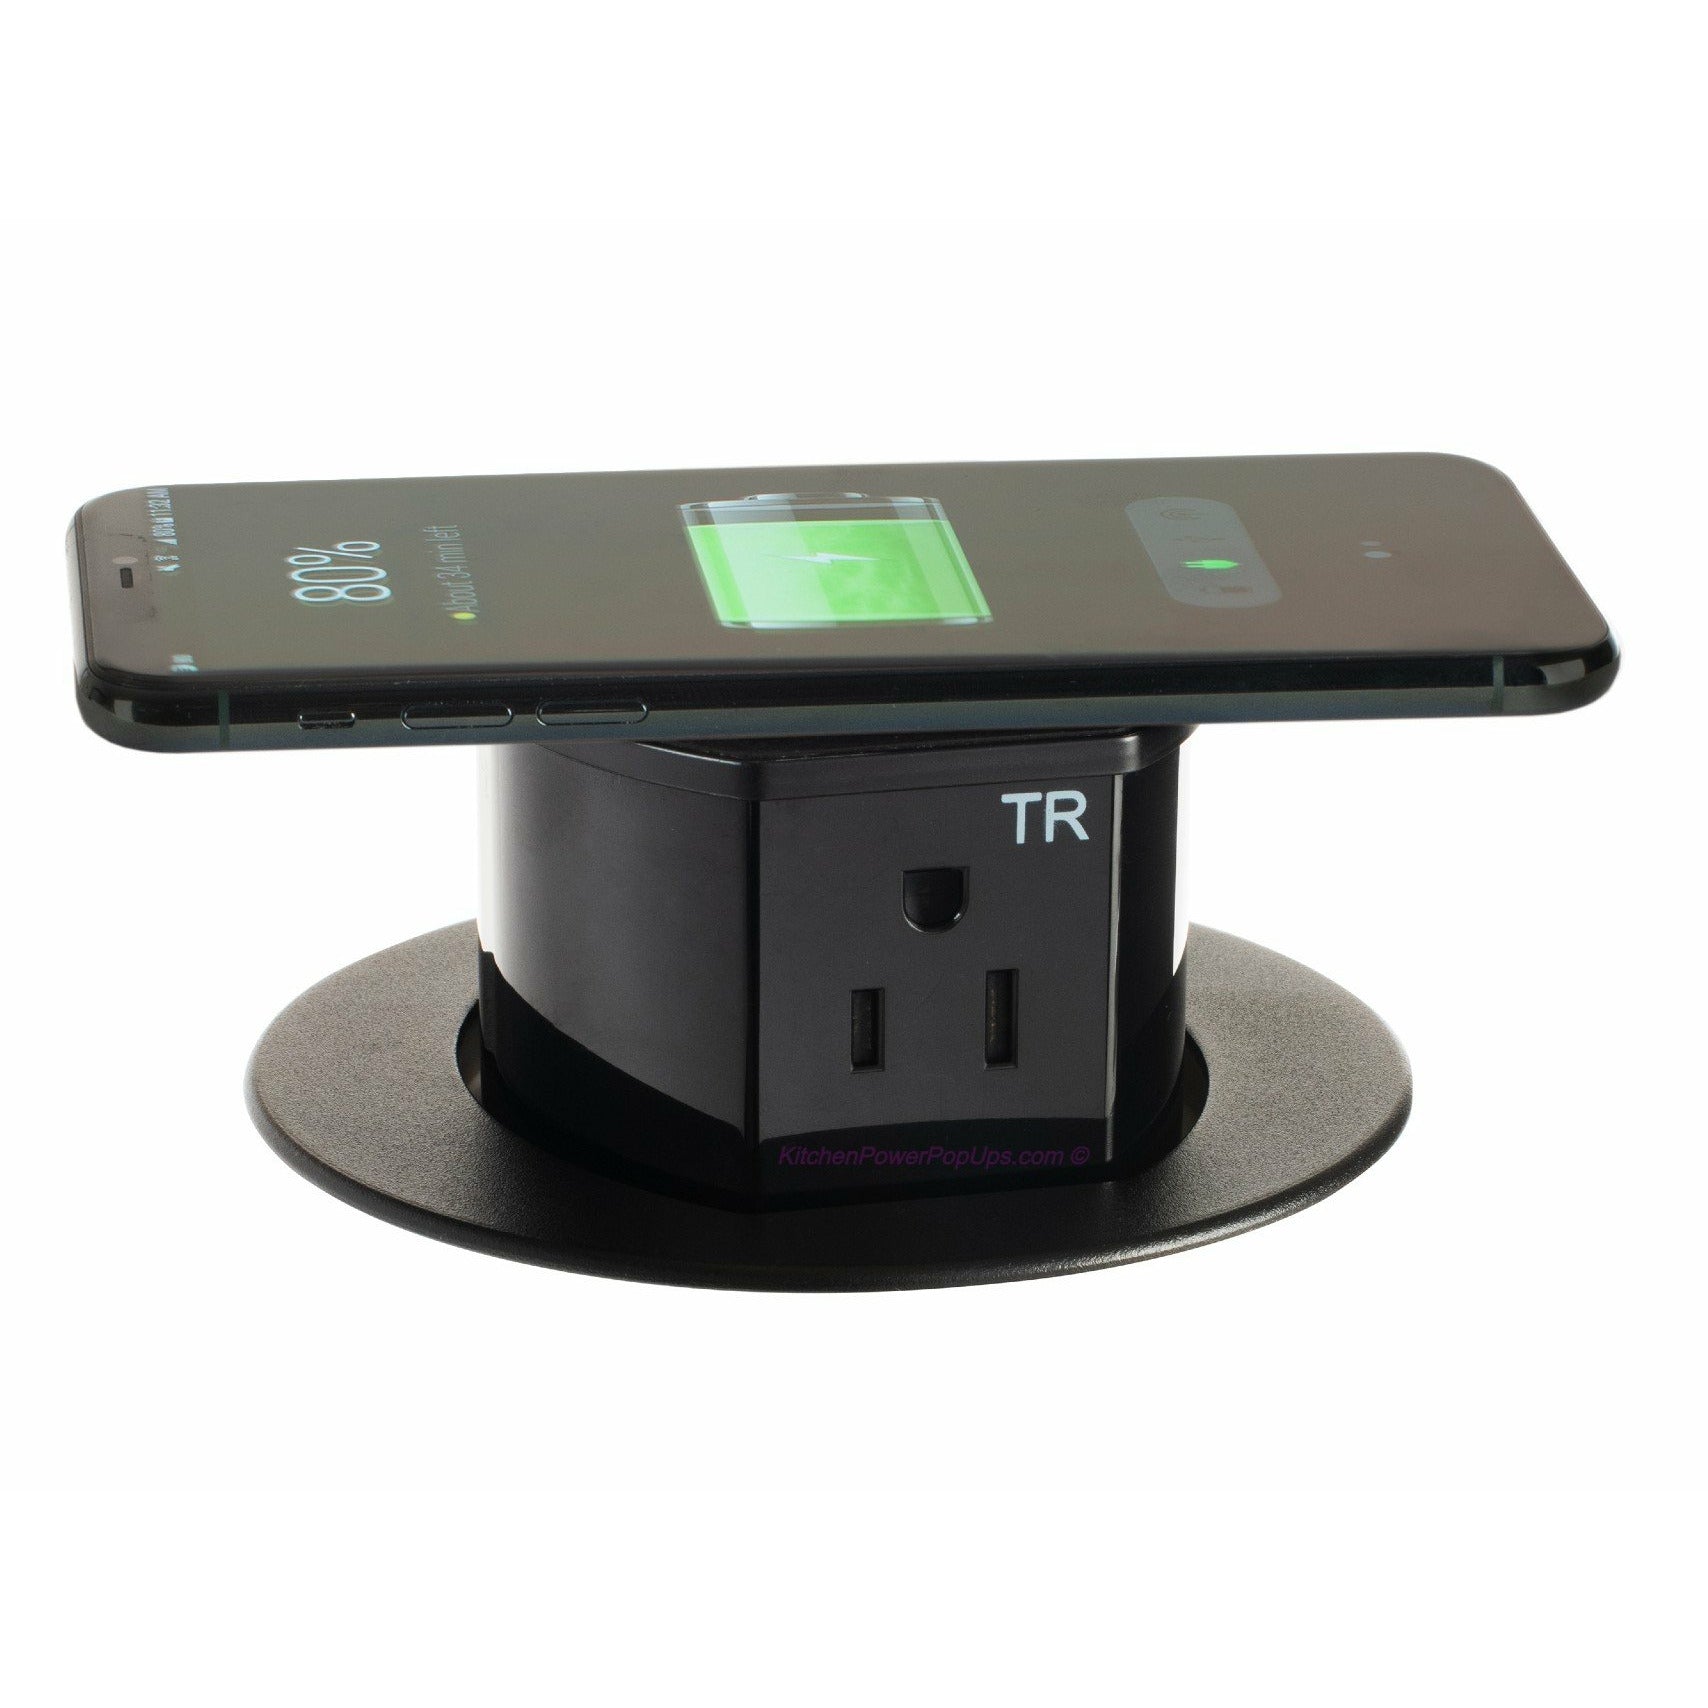 Bluetooth Wireless Qi Charging Power Cube - USB and Power Outlets